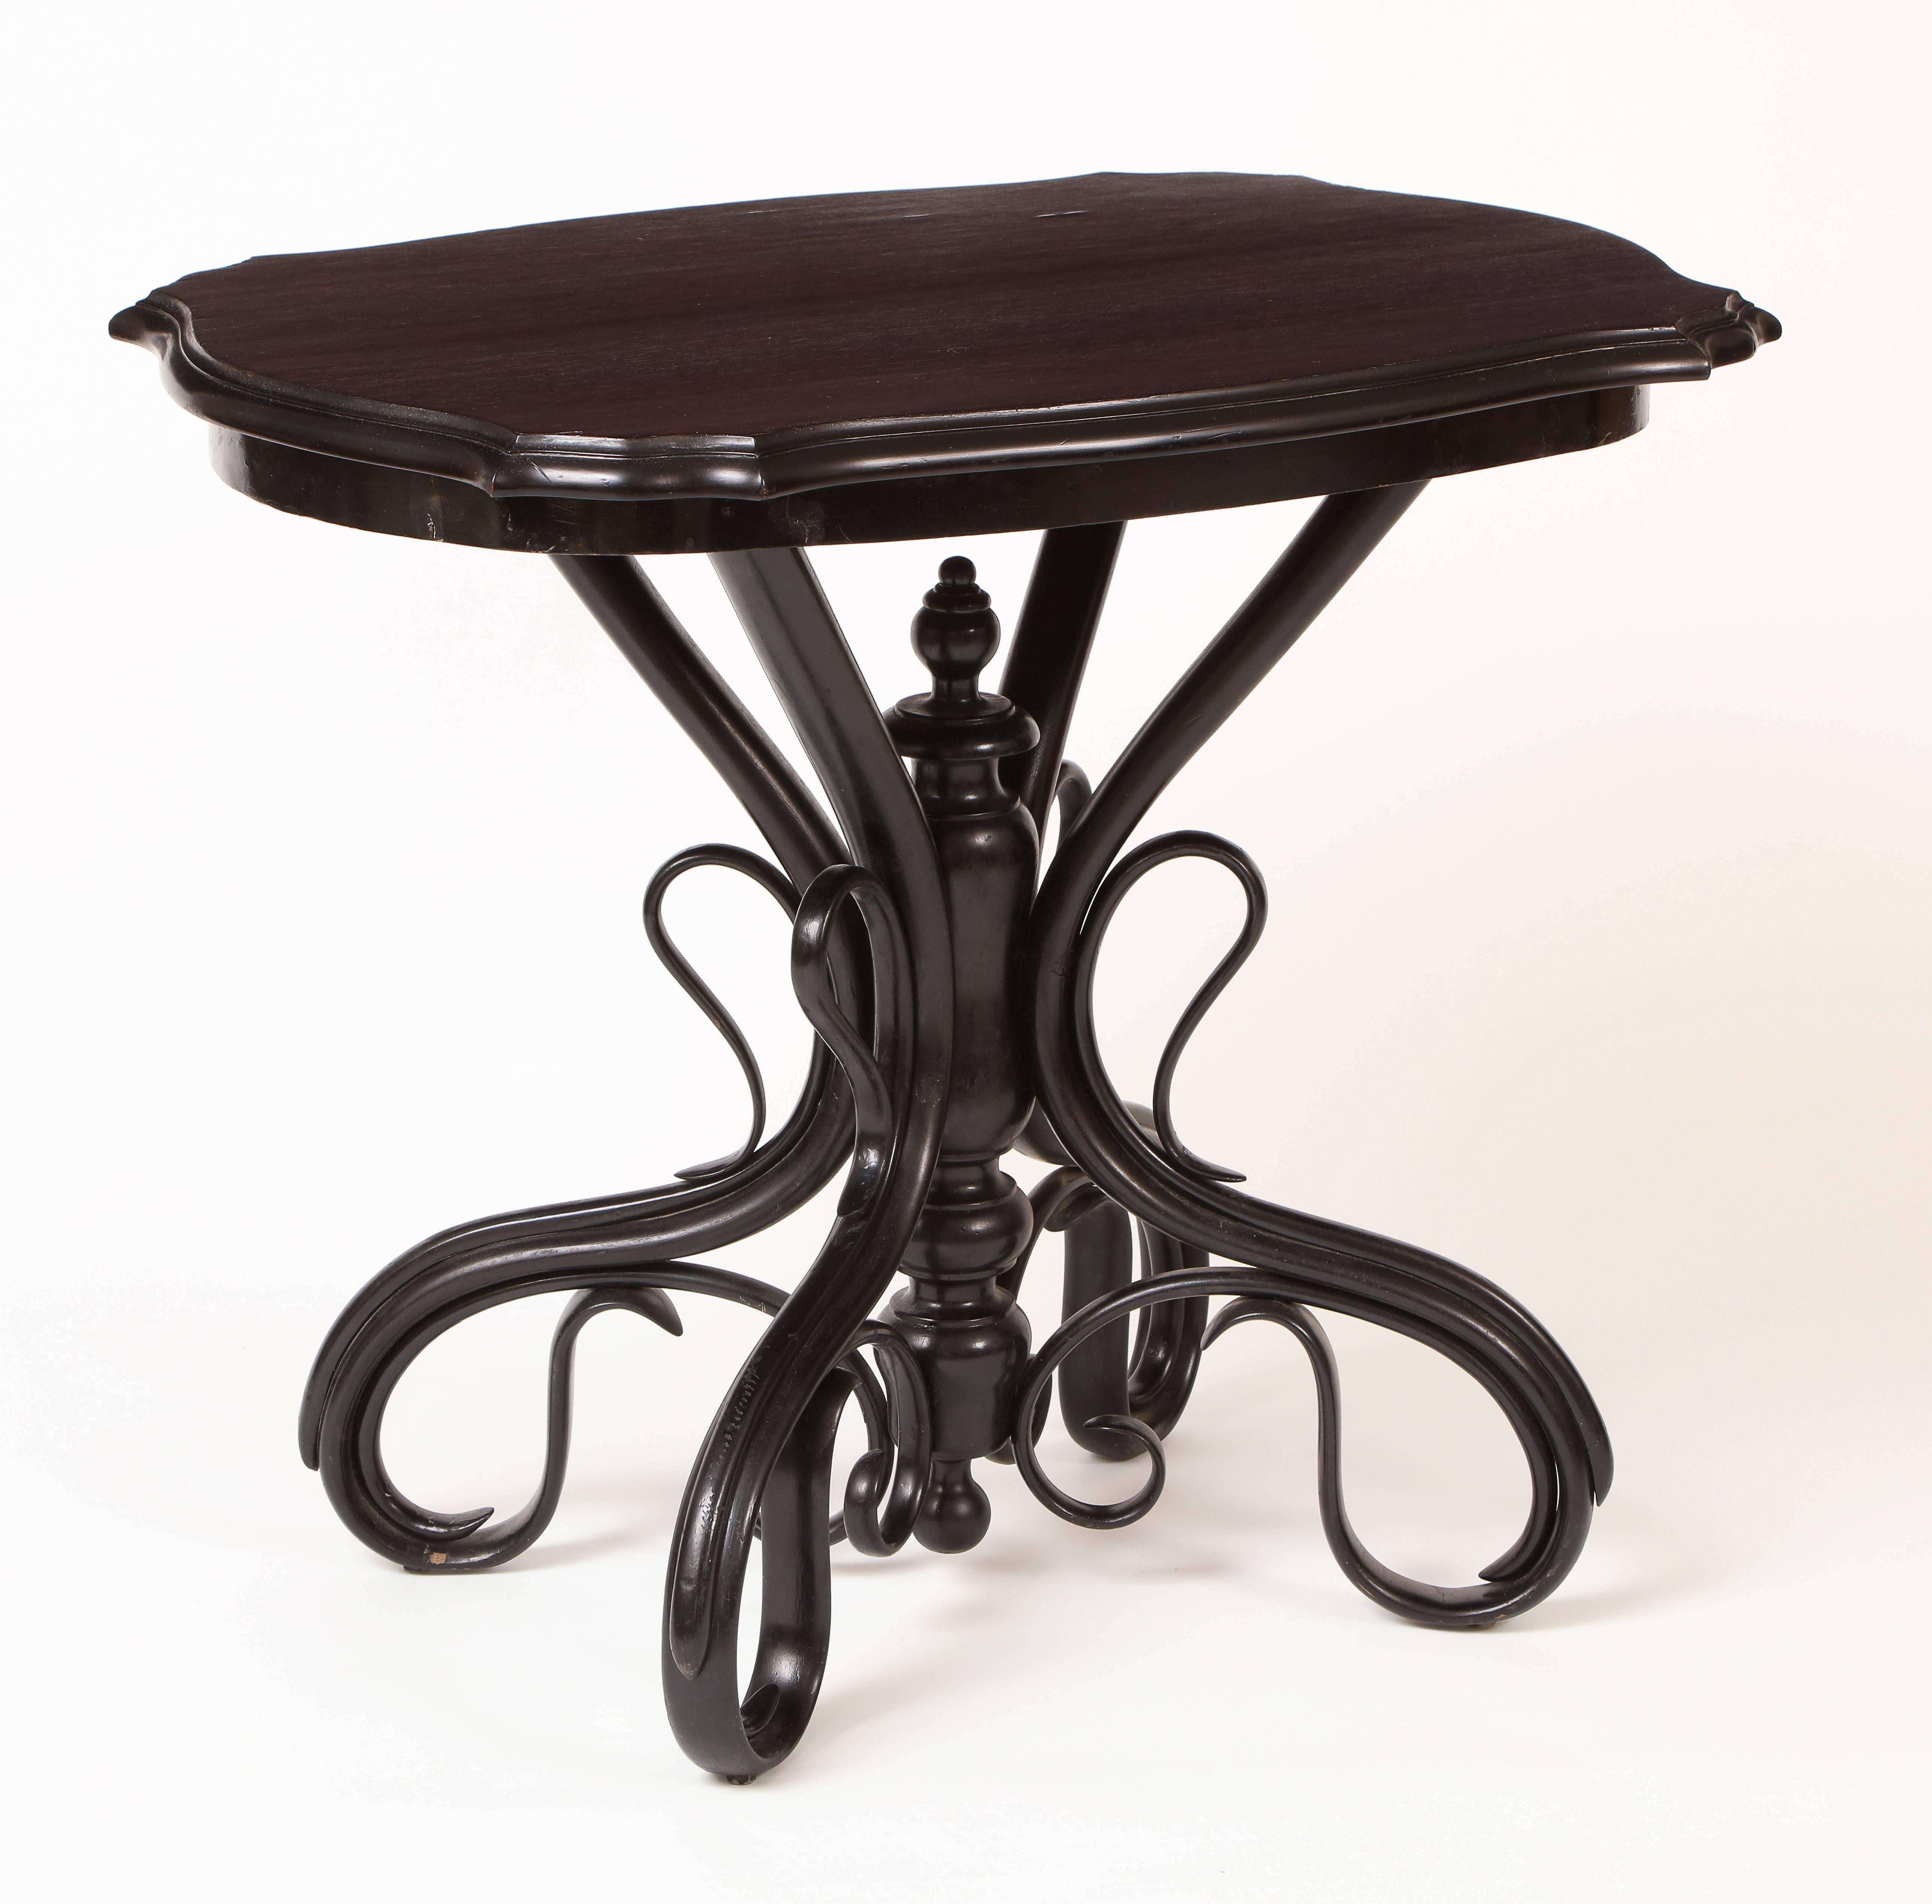 This bentwood table, with its shaped stained wooden top with molded edge and narrow apron resting on an ebonized base with central turned standard around which multiple intersecting curved bentwood elements are attached, was made in the late